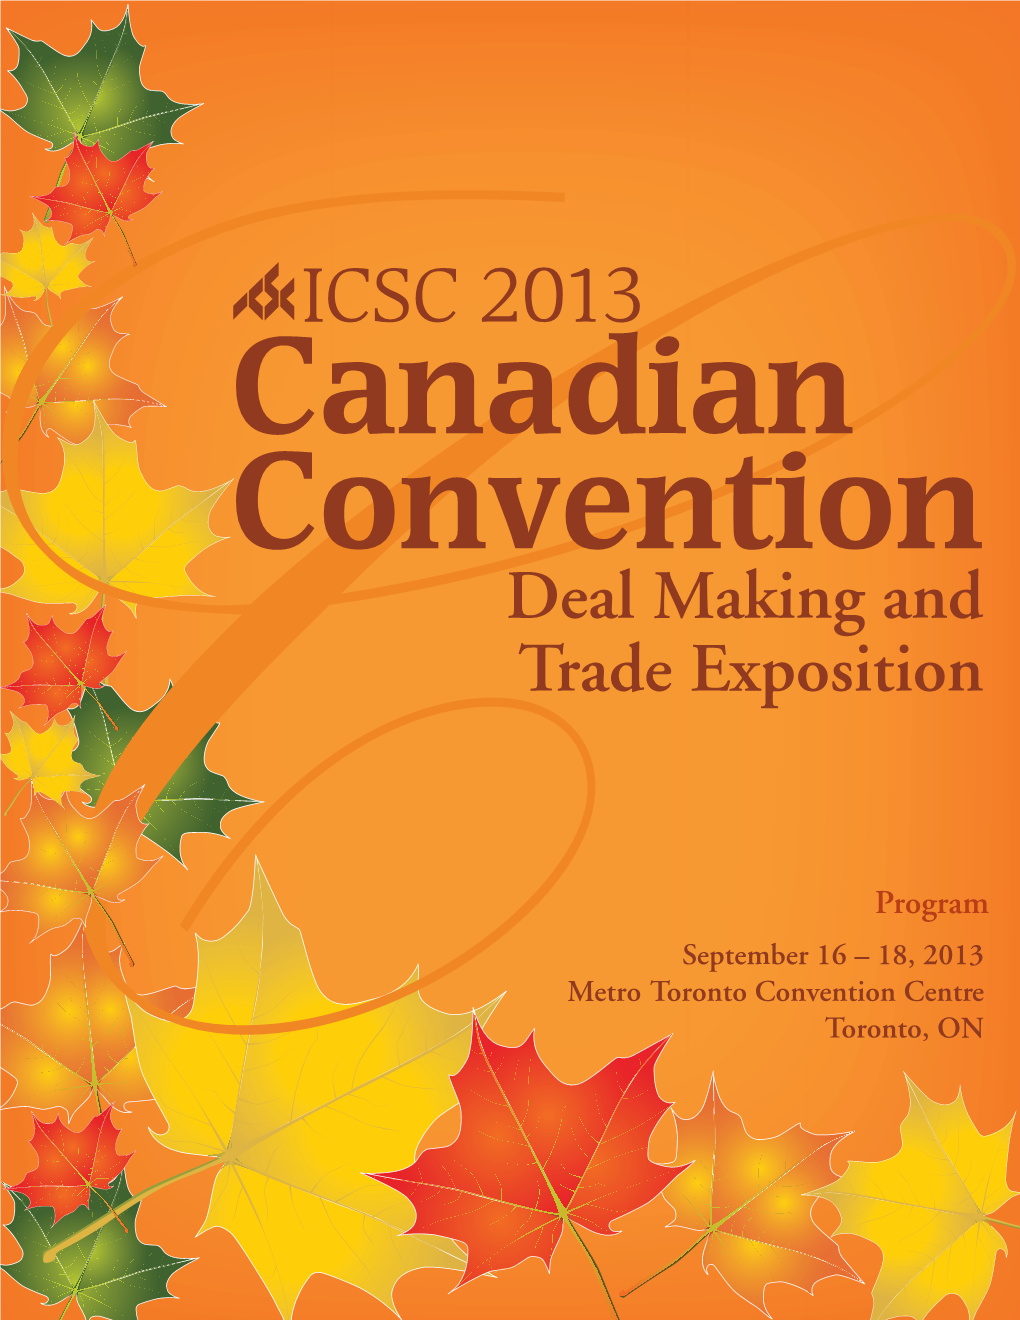 ICSC 2013 Canadian Convention Deal Making and Trade Exposition